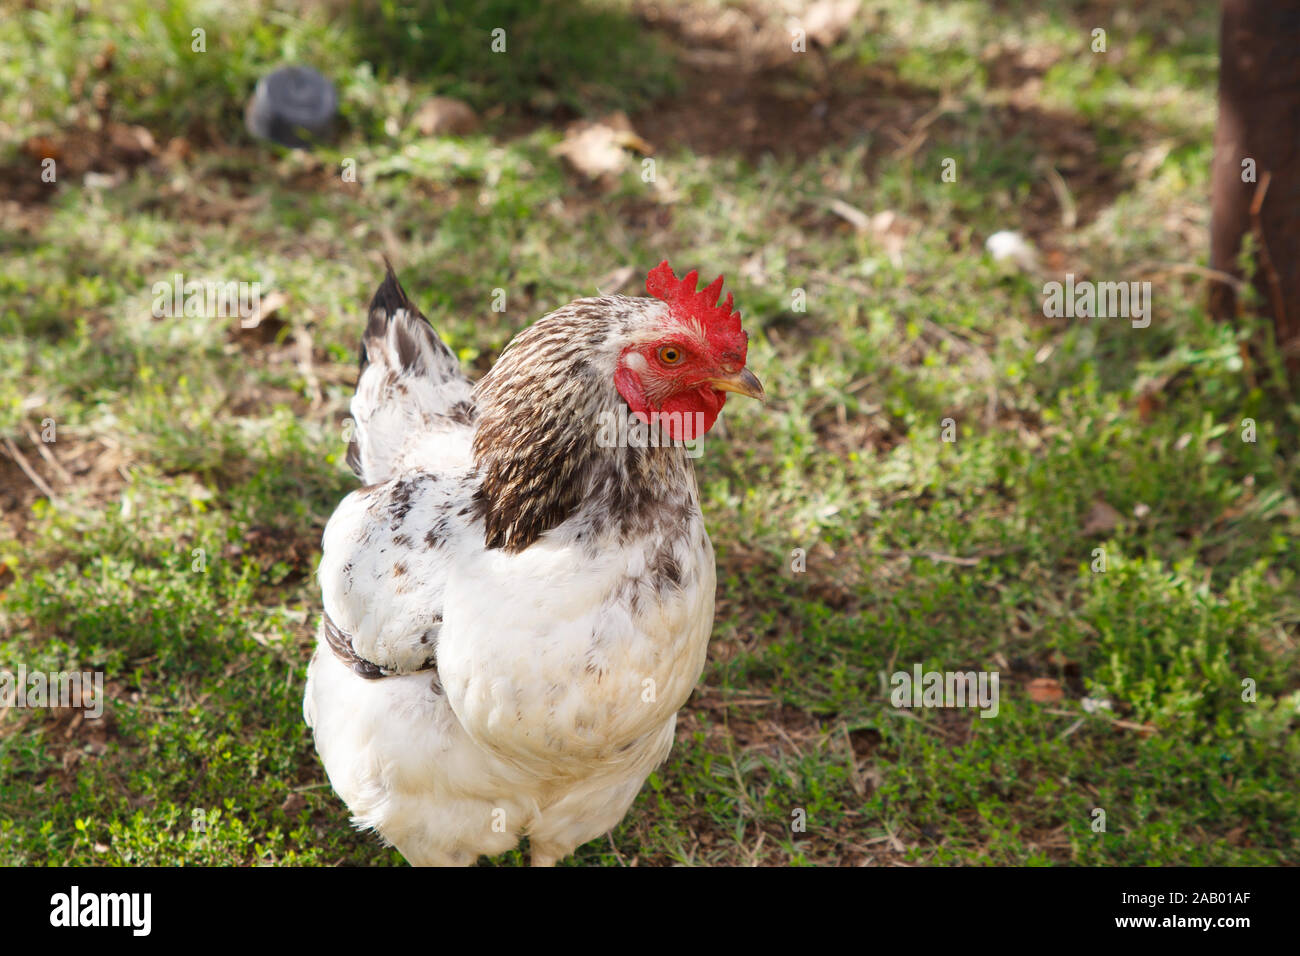 Black and white rooster walking in the yard in a rural poultry farm in a sunny warm day. Stock Photo